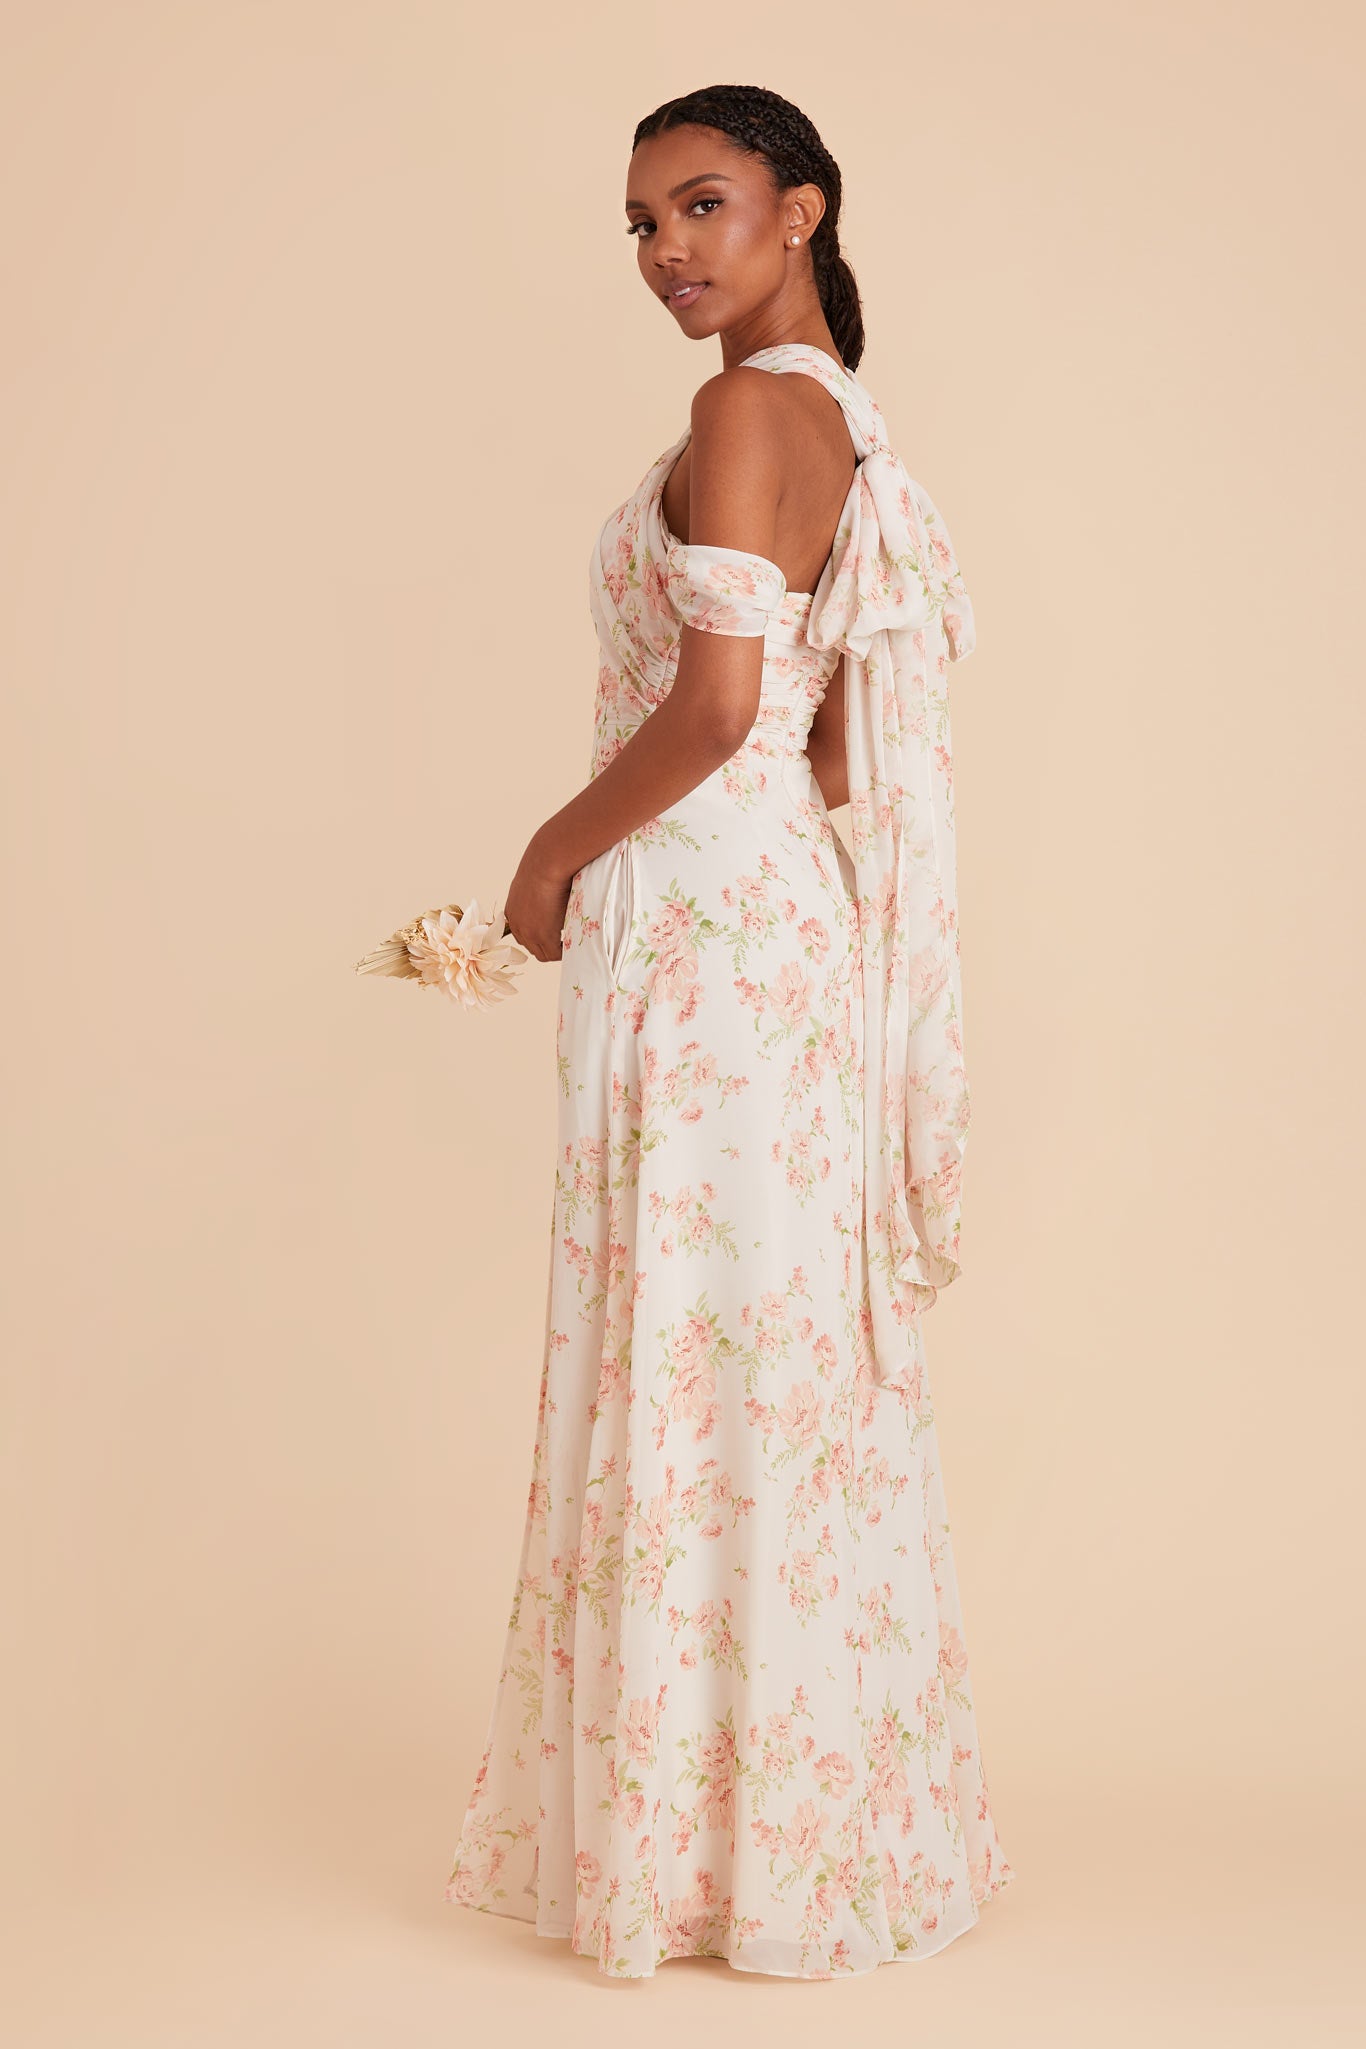 Whimsical Blooms Cara Convertible Dress by Birdy Grey